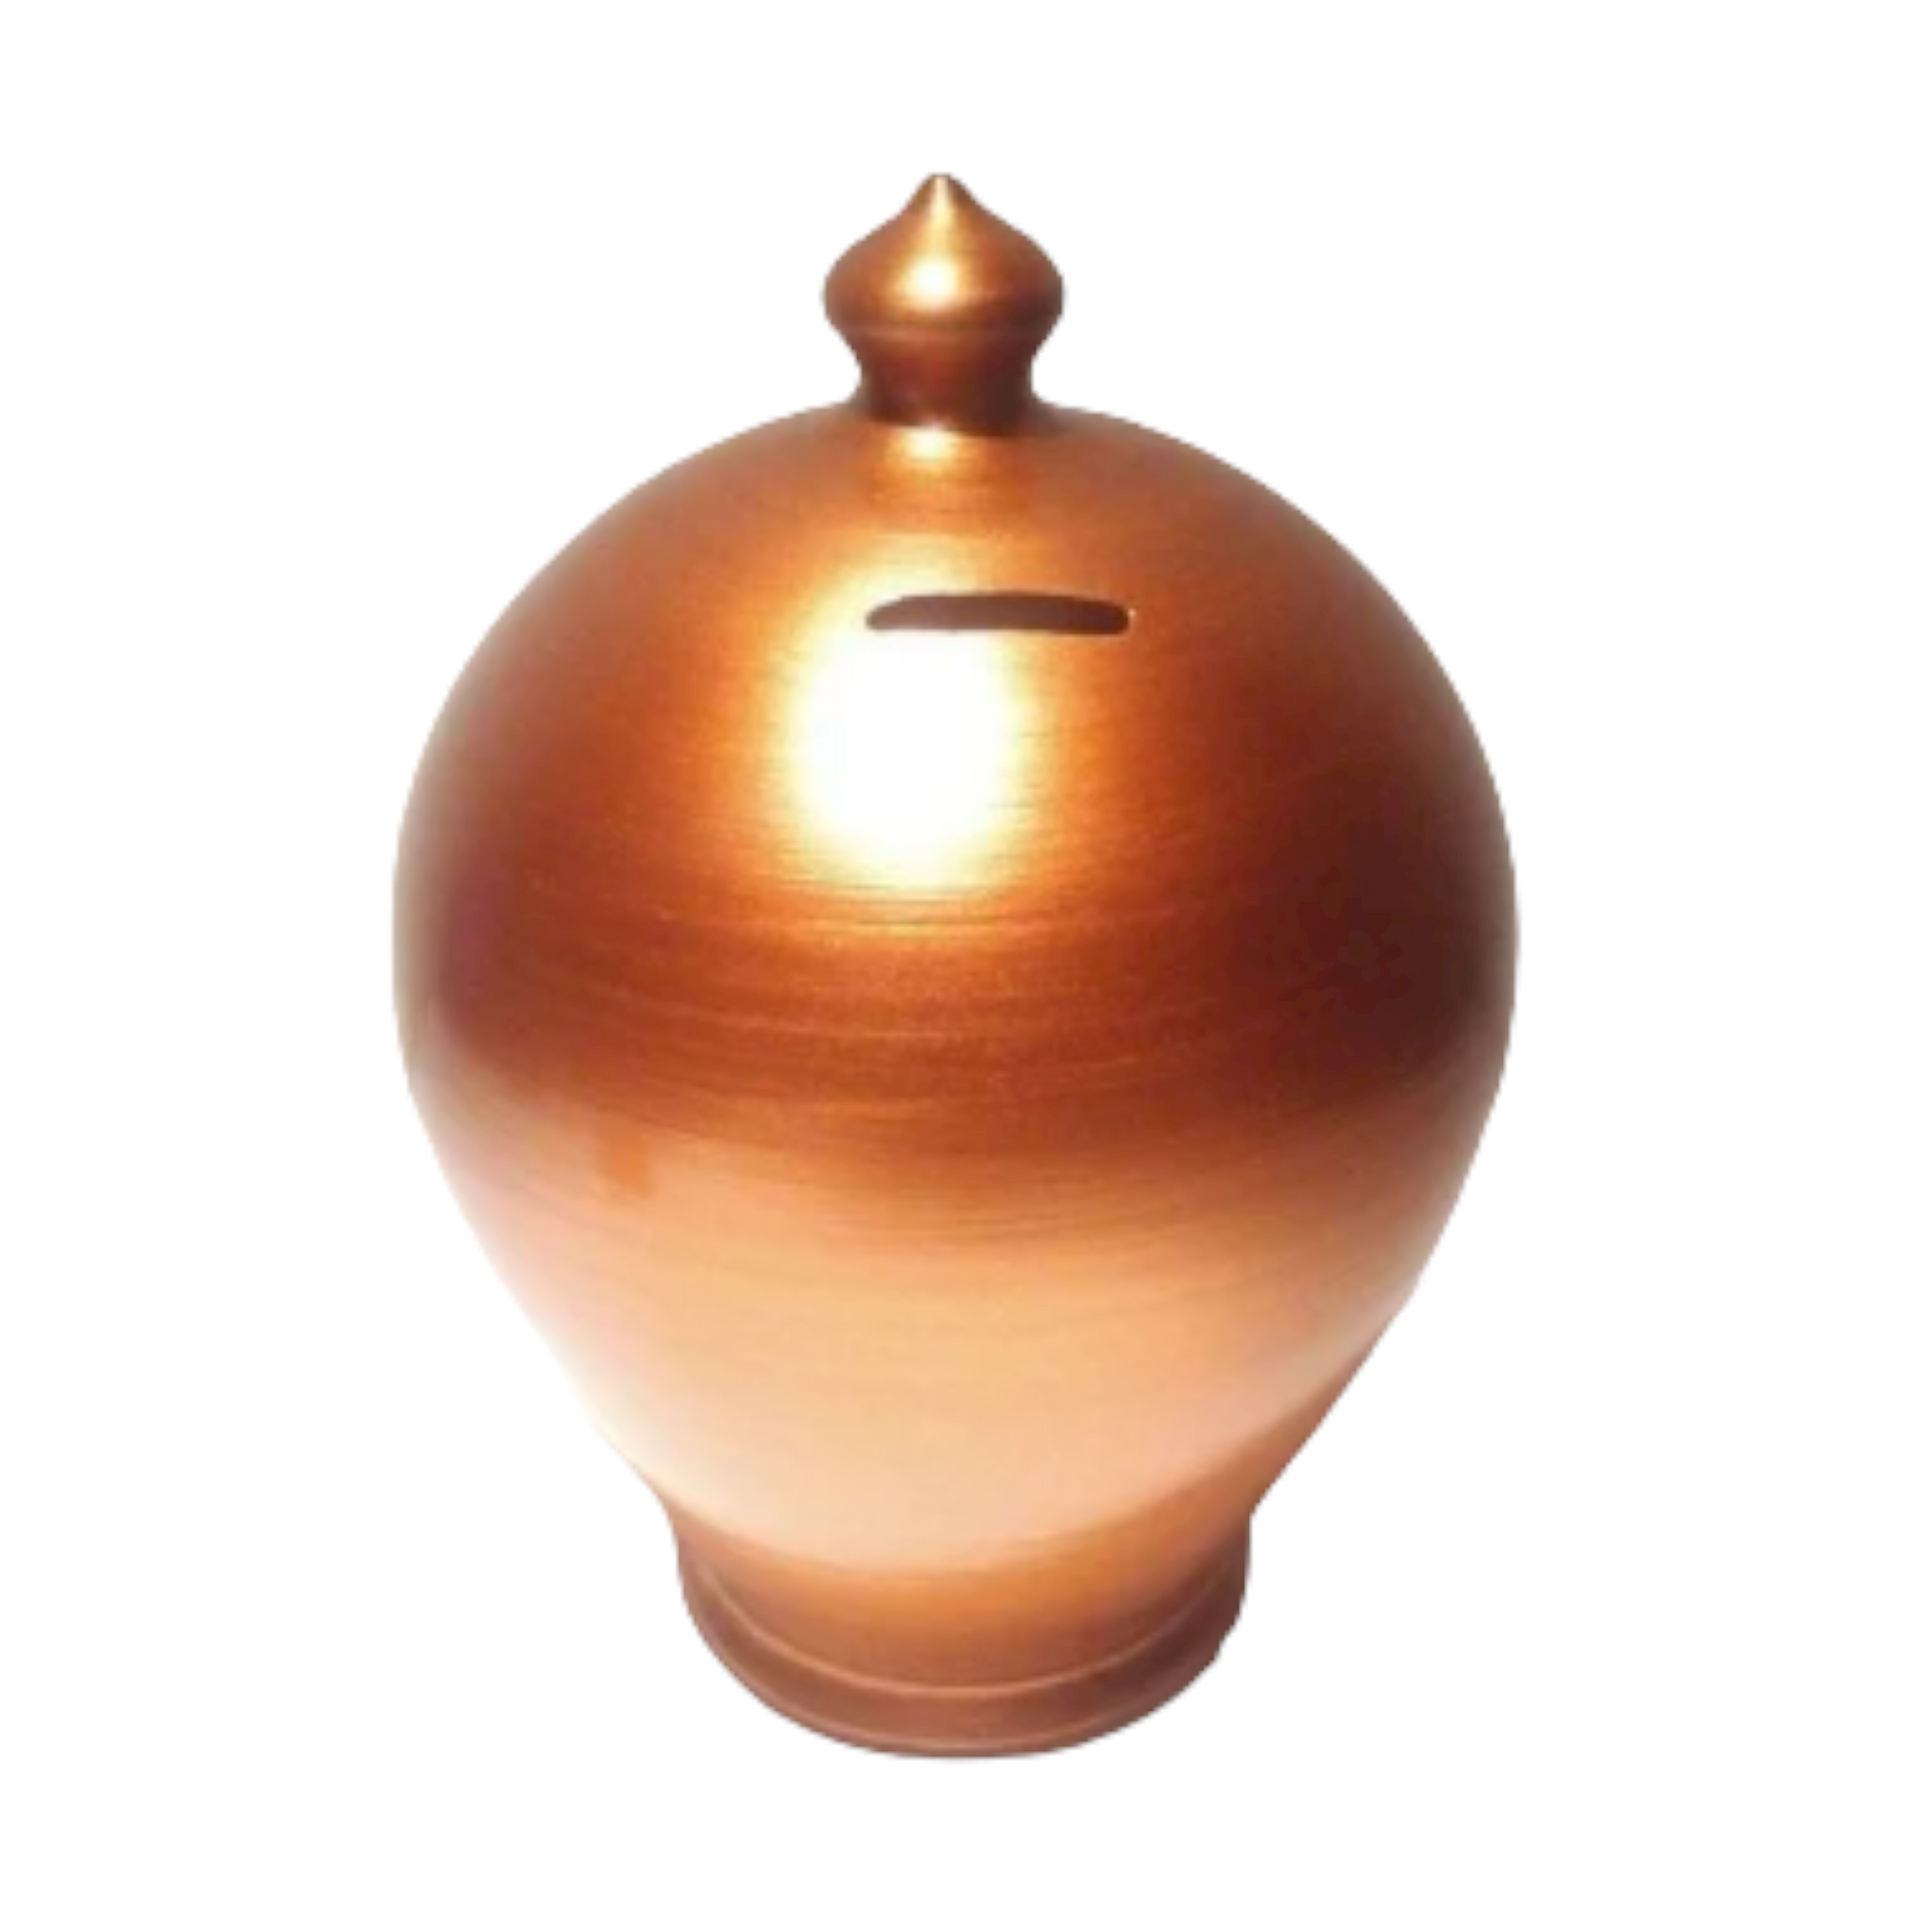 Handmade in Italy, the ideal gift for piggy bank lovers both kids and adults! Color: Copper, as in picture. 💰Size: 15 cm = 5.90 inches in height. Circumference: 40 cm = 15.74 inches. With hole and stopper plug, or without hole.